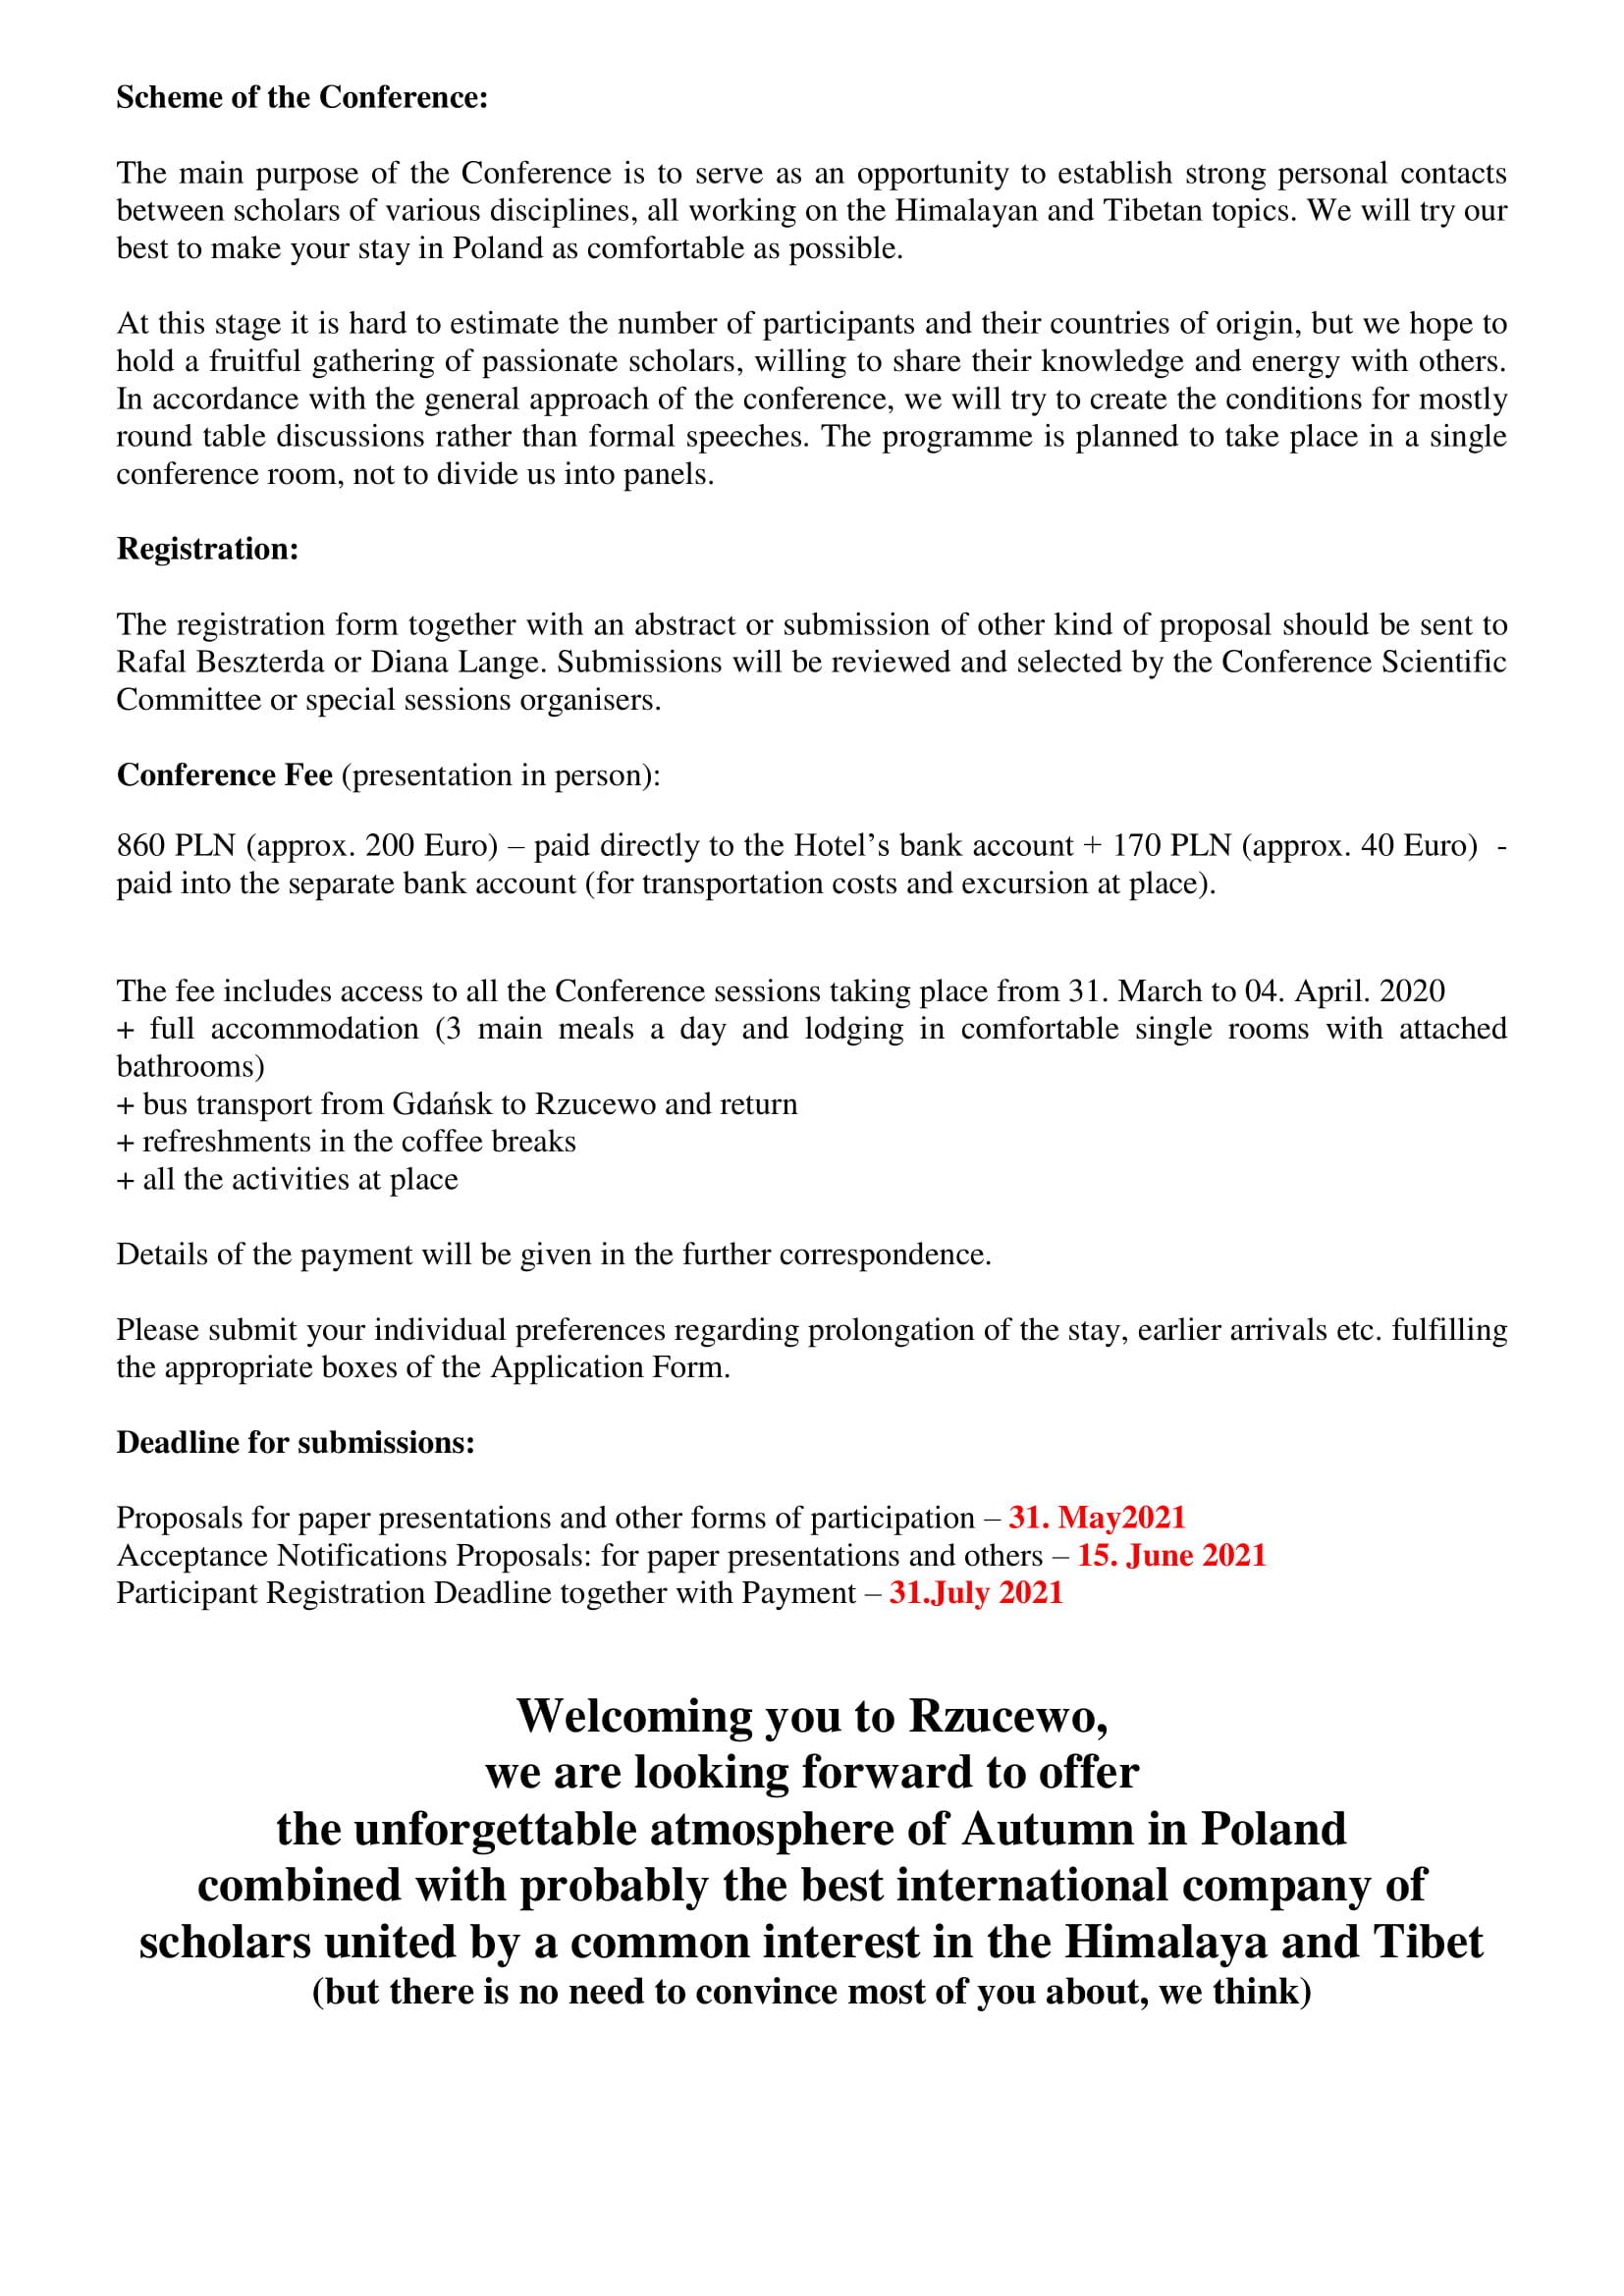 New Call for Papers Rzucewo 2021 3